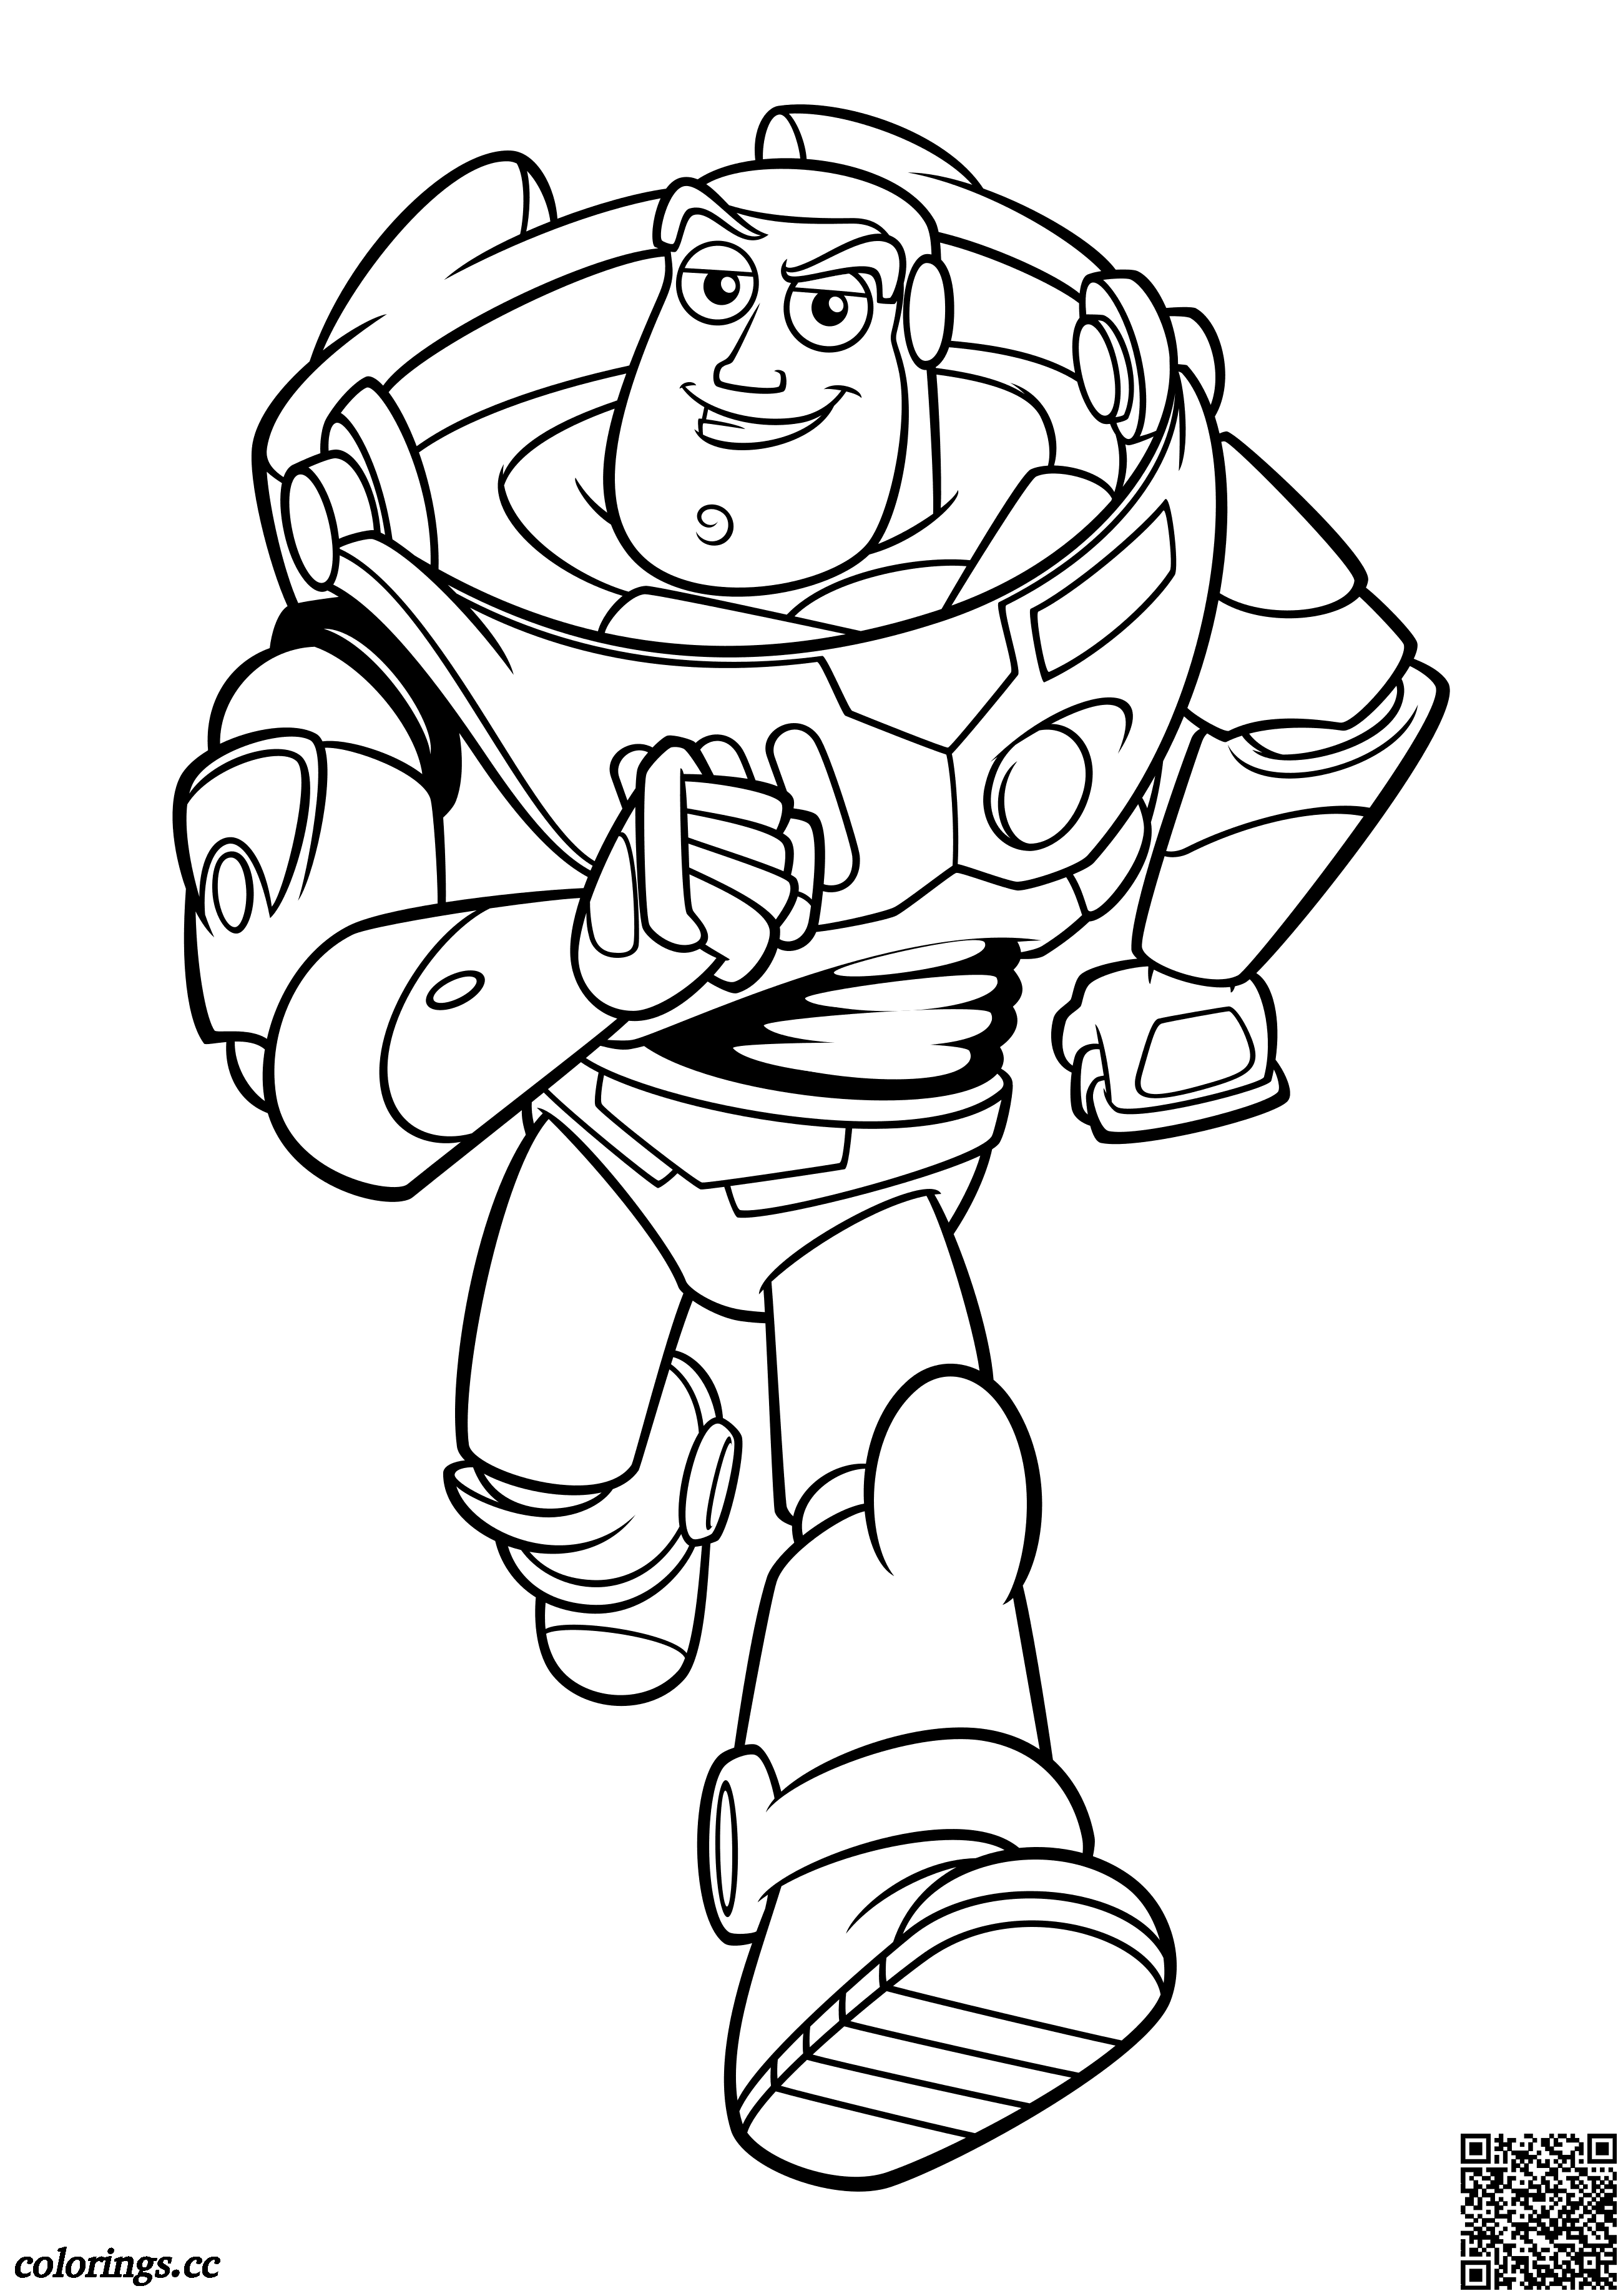 Buzz Lightyear Coloring Pages For Kids